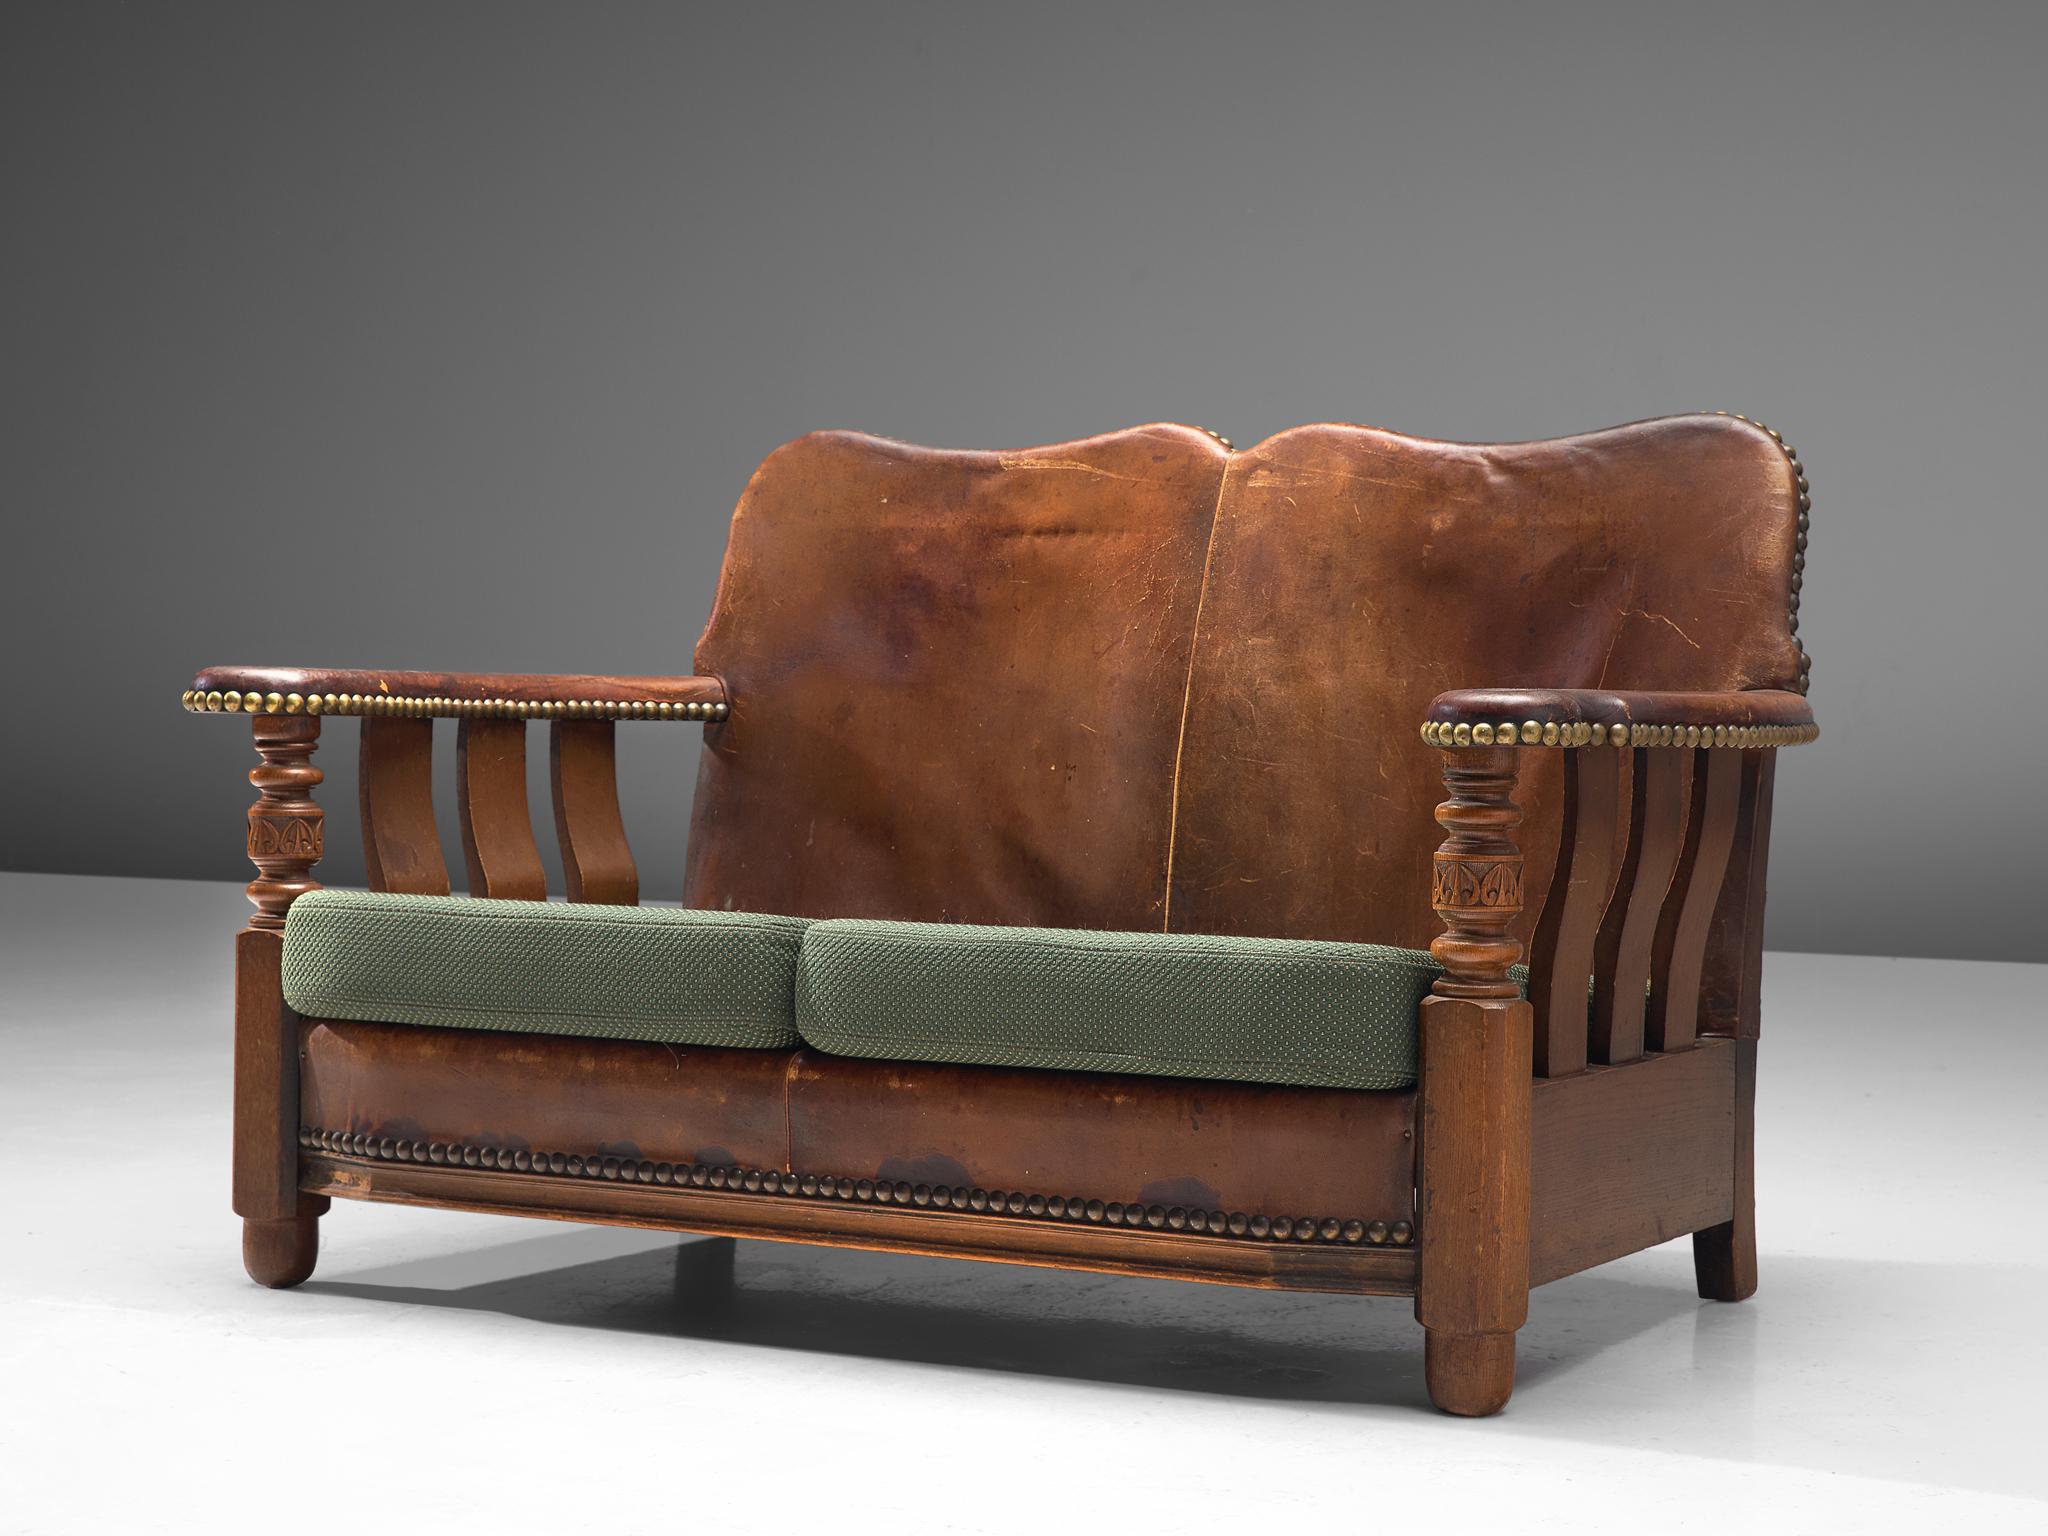 Settee or sofa, stained wood, leather, fabric, brass, Denmark, 1920s.

Exceptional example of early Danish design with robust, bulky aesthetics. The frame of the settee is made of stained wood. The back and armrests are upholstered with nail fitted,